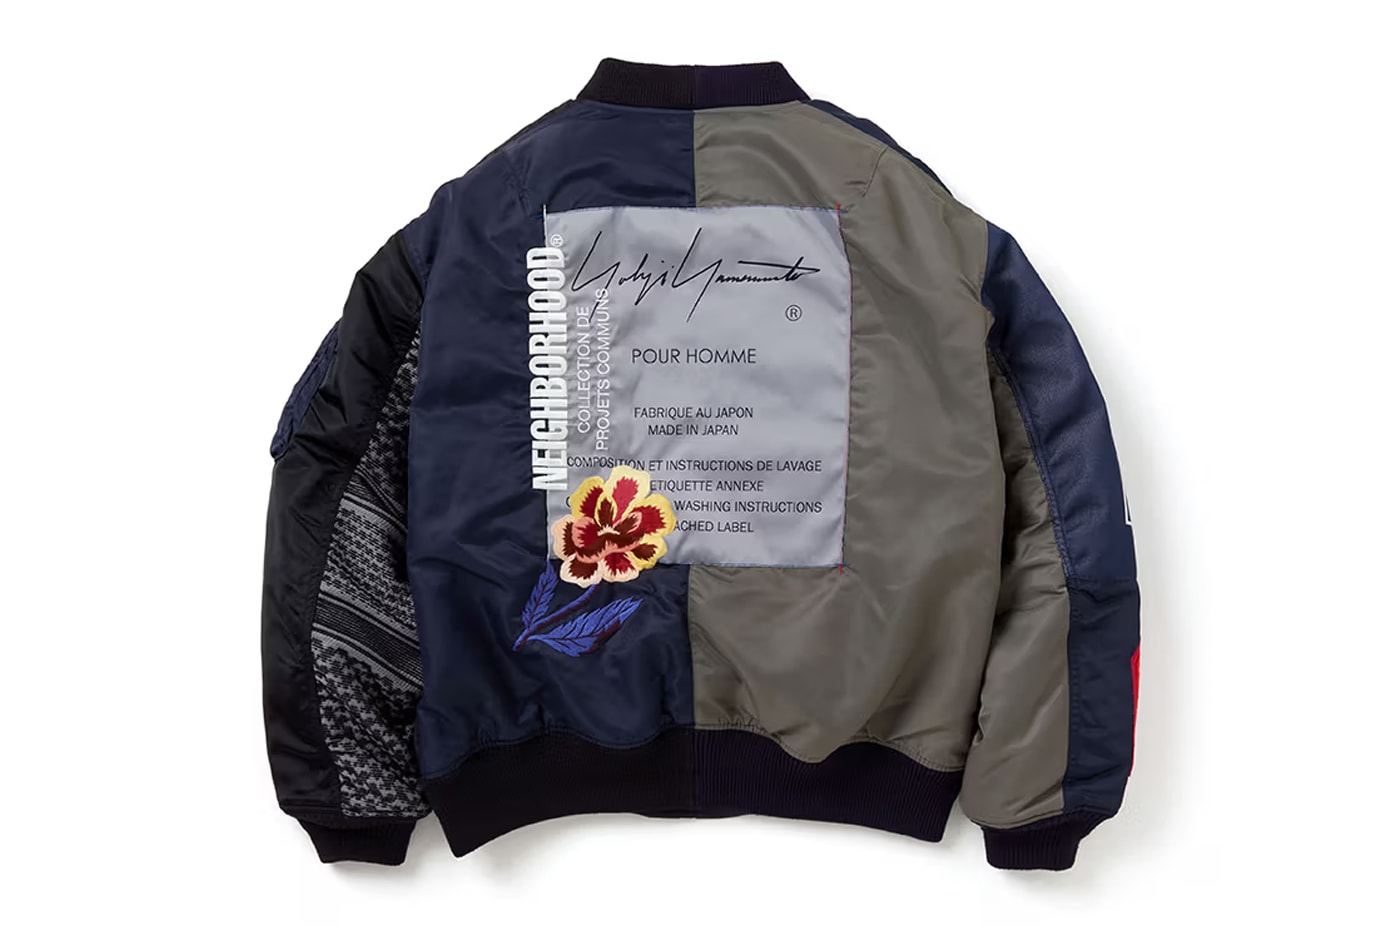 NEIGHBORHOOD and Yohji Yamamoto Pour Homme Join Together For Second Collaboration tshirt varsity jackets rebellious spirit antithesis 